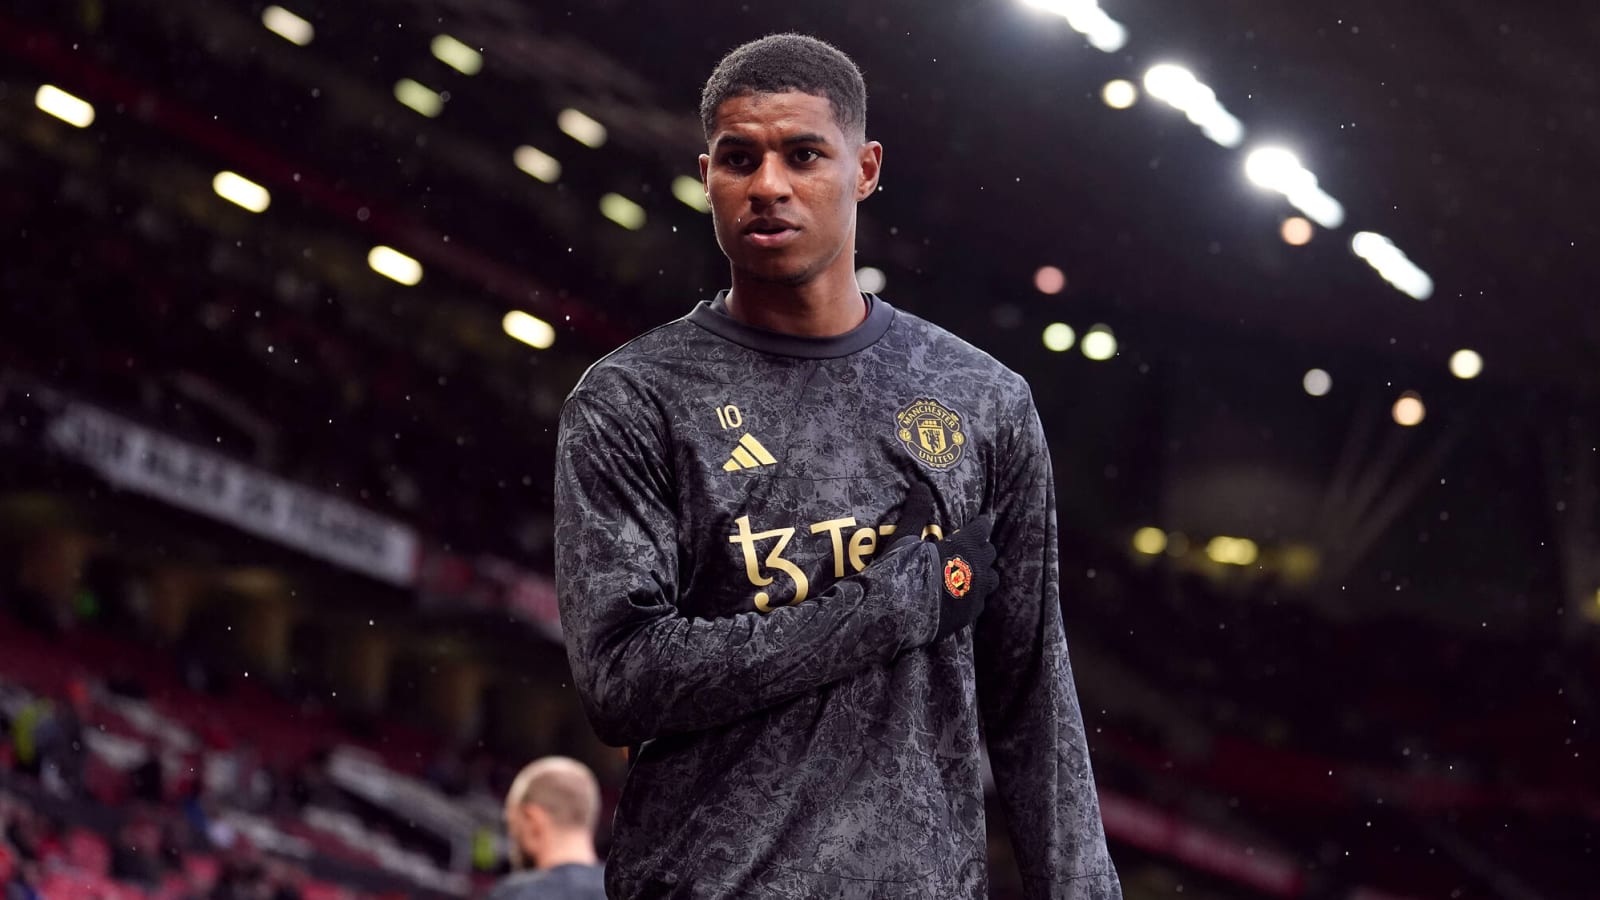 What fan shouted to Marcus Rashford during Old Trafford warm-up row